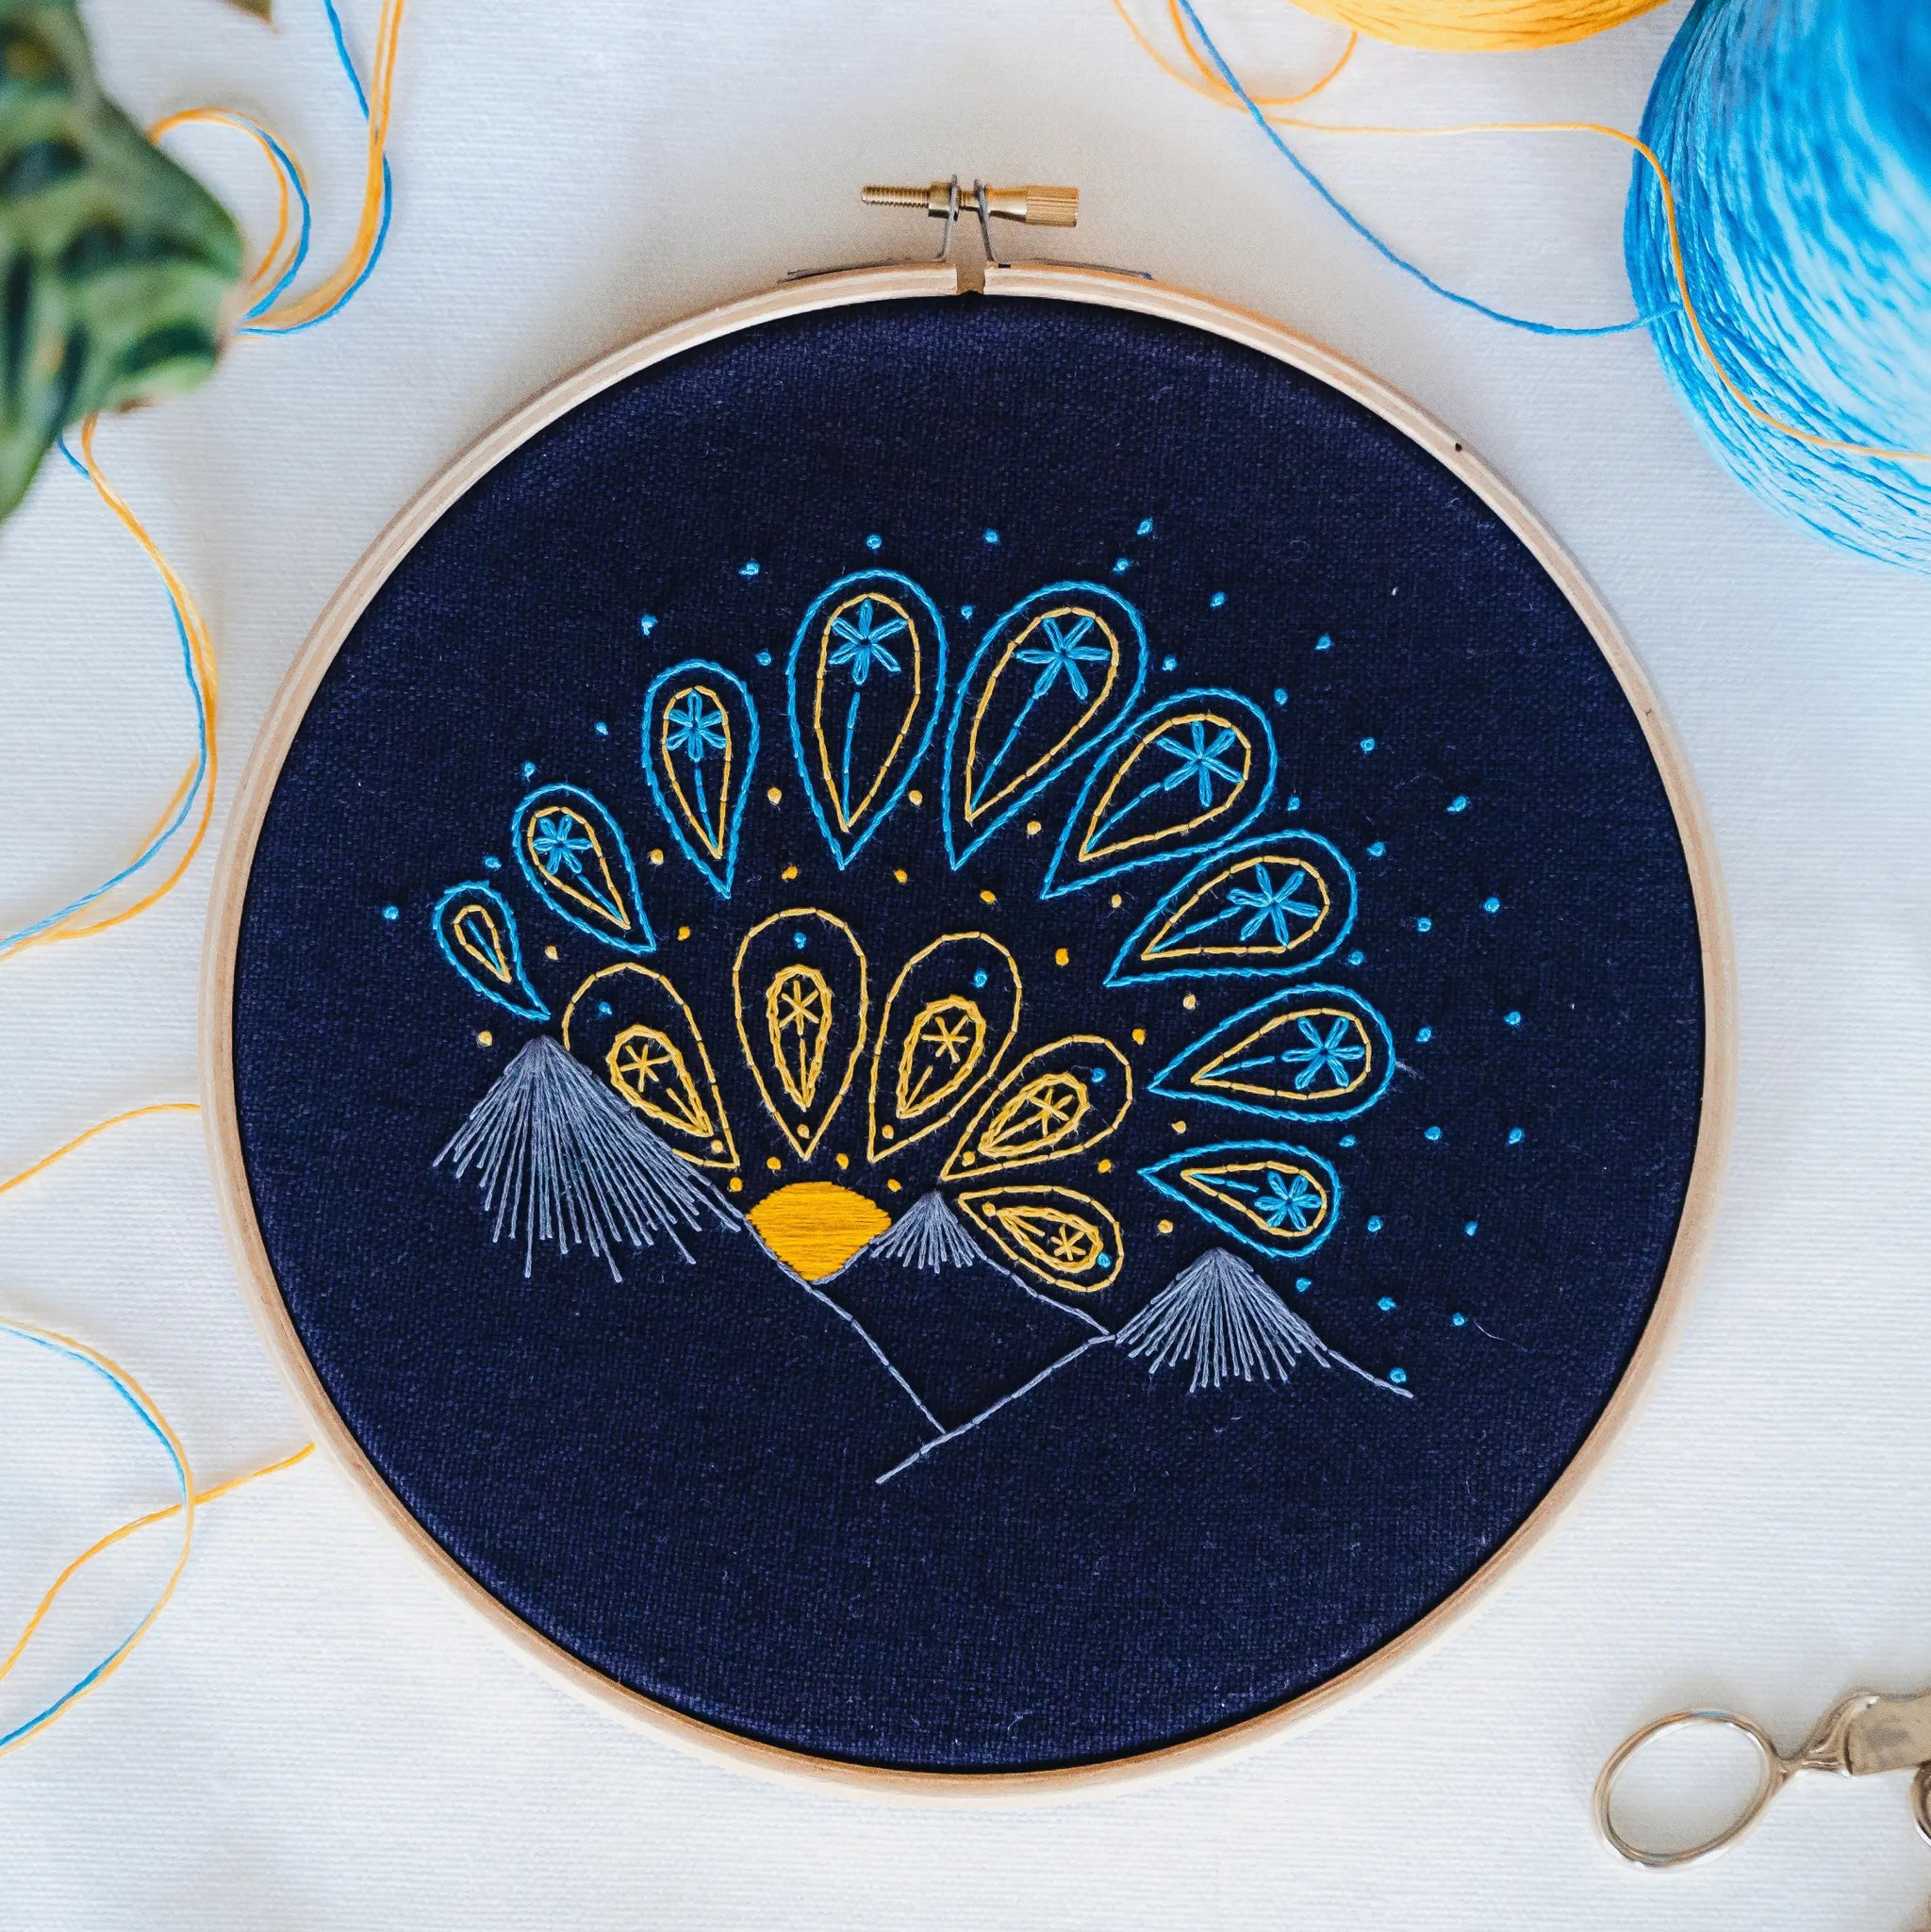 Peacock Feather Embroidery Design – The Only Stitch